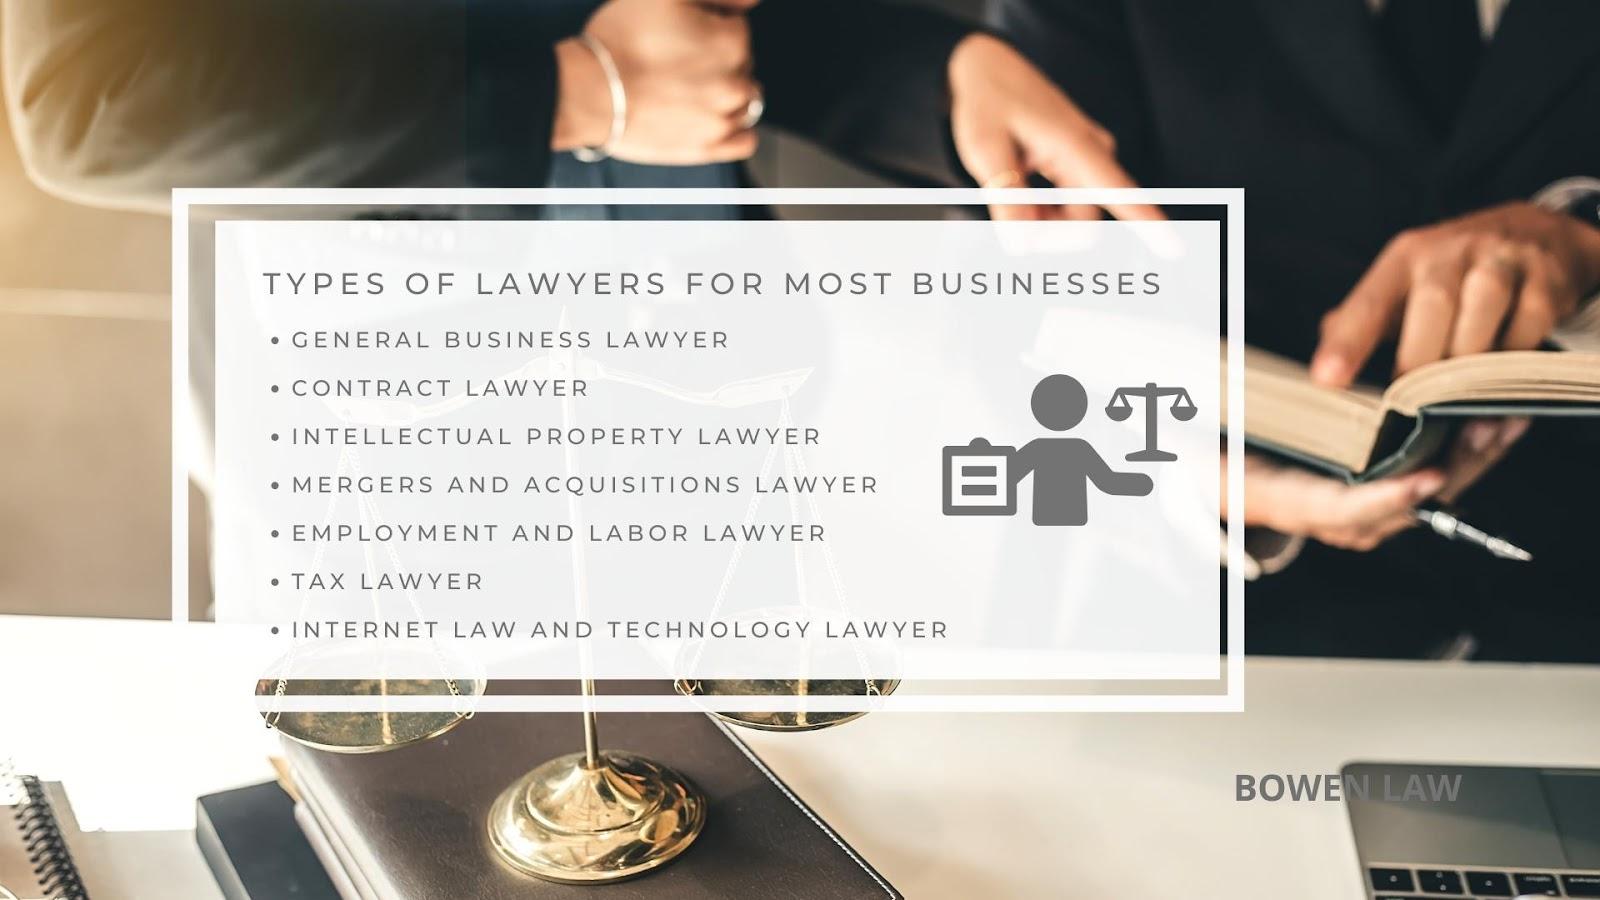 Infographic image of the types of lawyers for most businesses